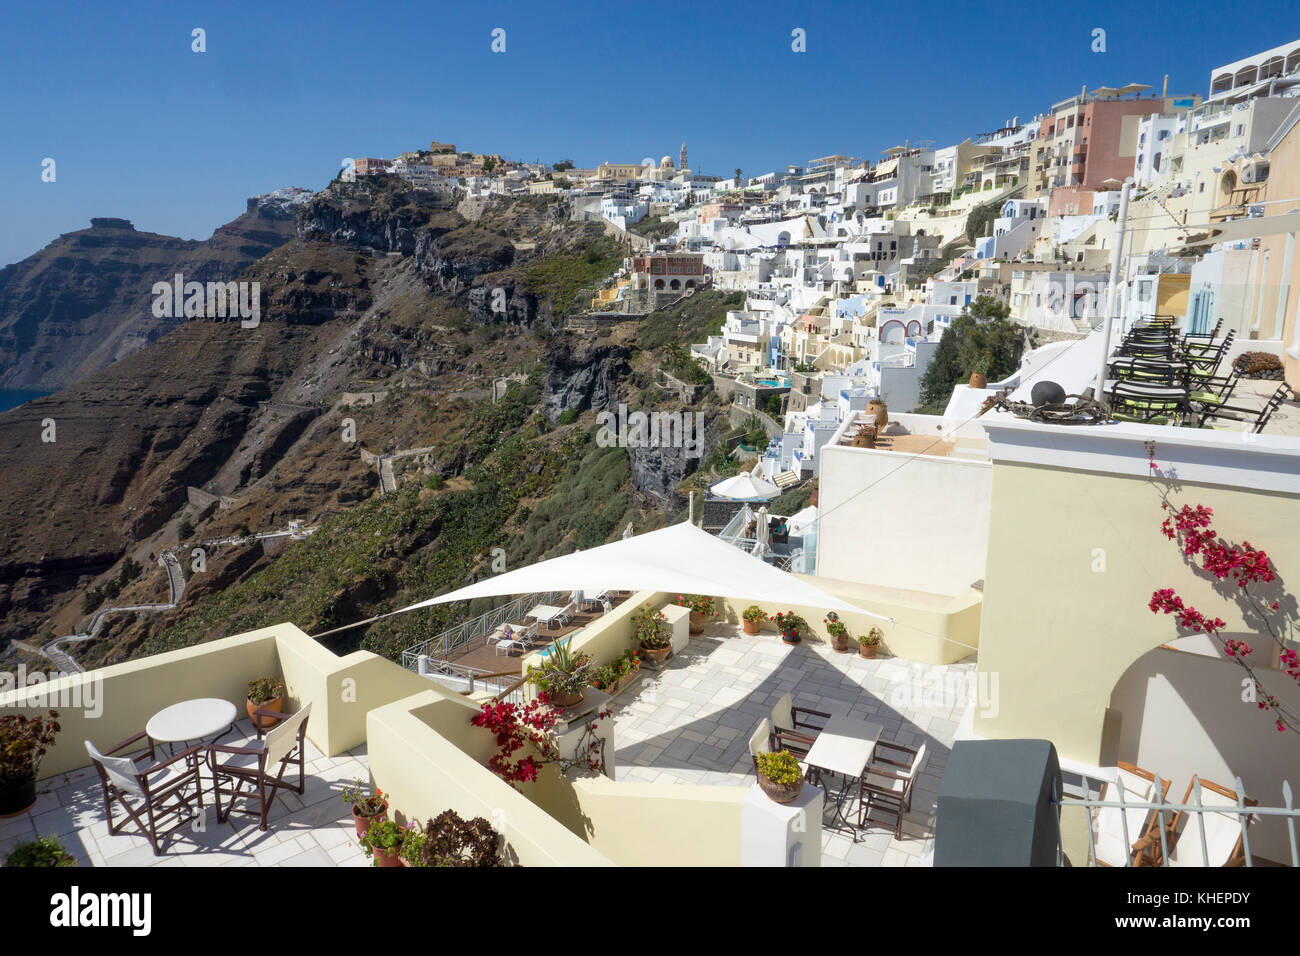 Roof terrace at the crater edge of with view on Caldera, Thira, Santorin island, Cyclades, Aegean, Greece Stock Photo